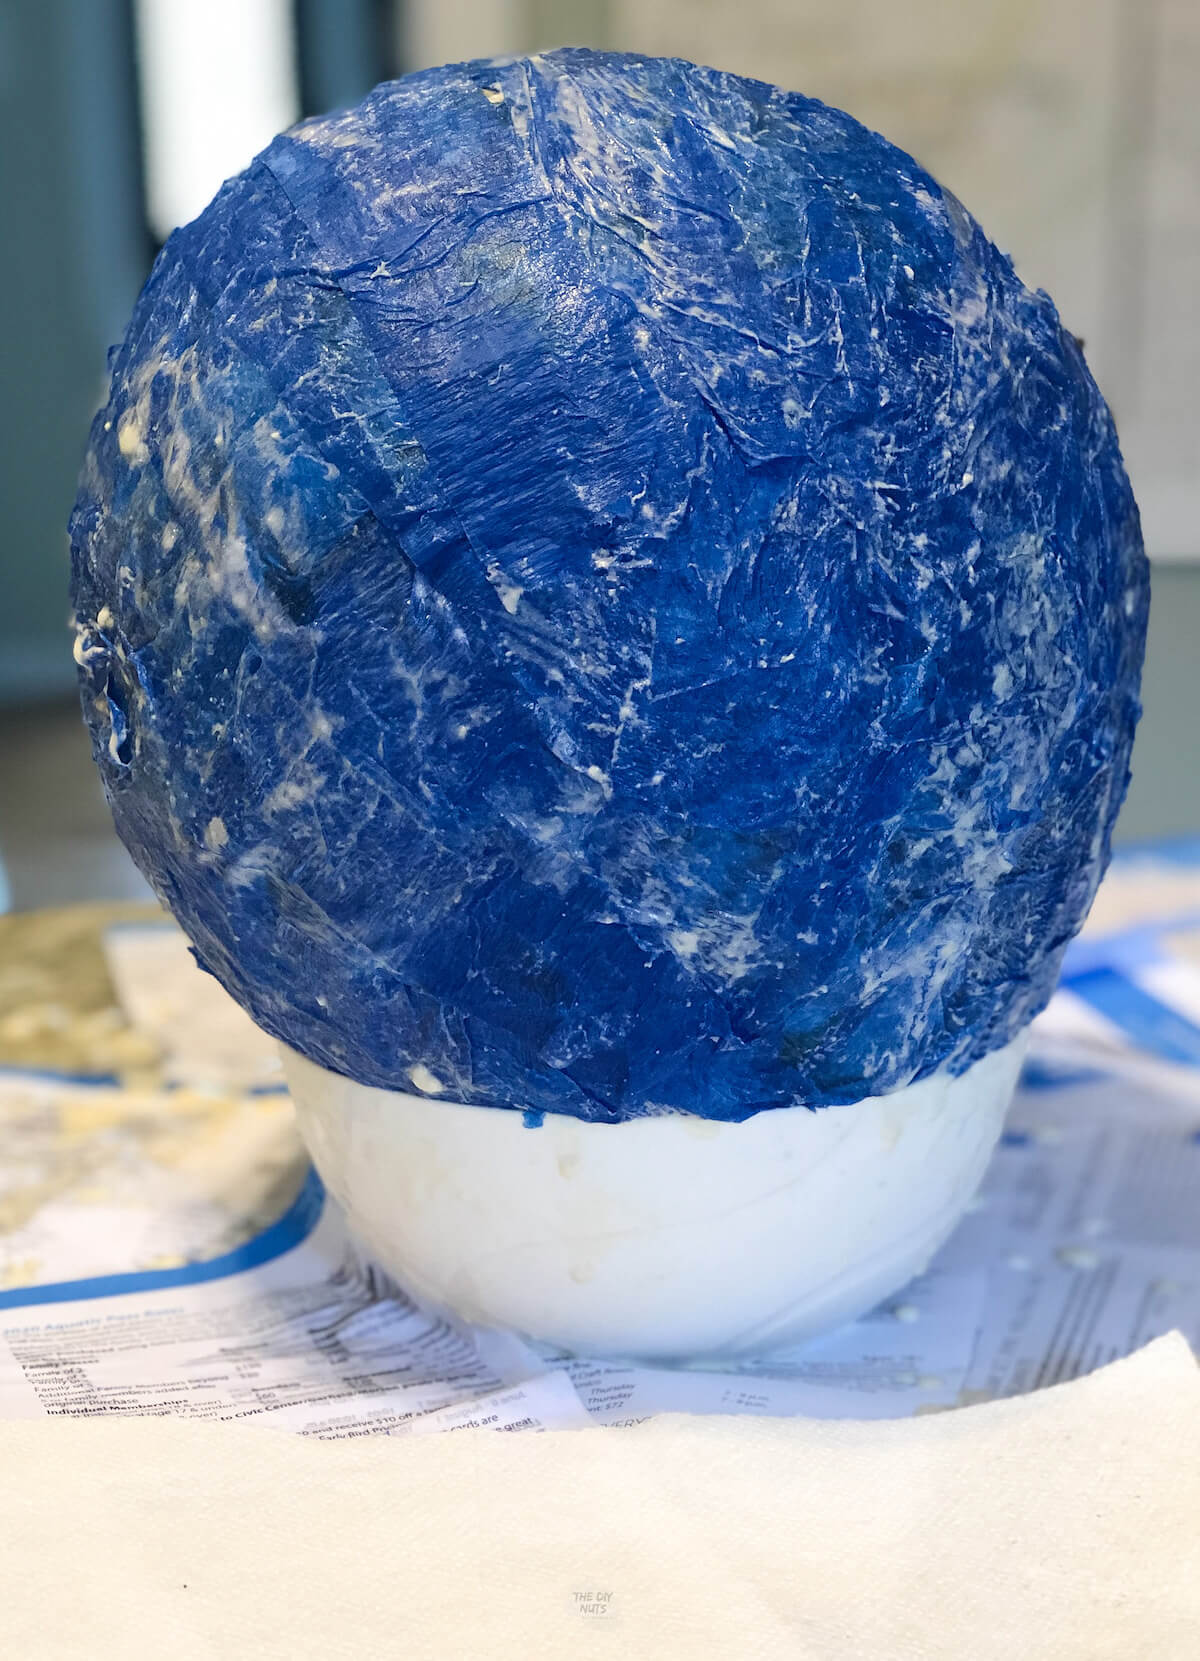 homemade blue piñata sitting on bowl with wet paper mache on it.